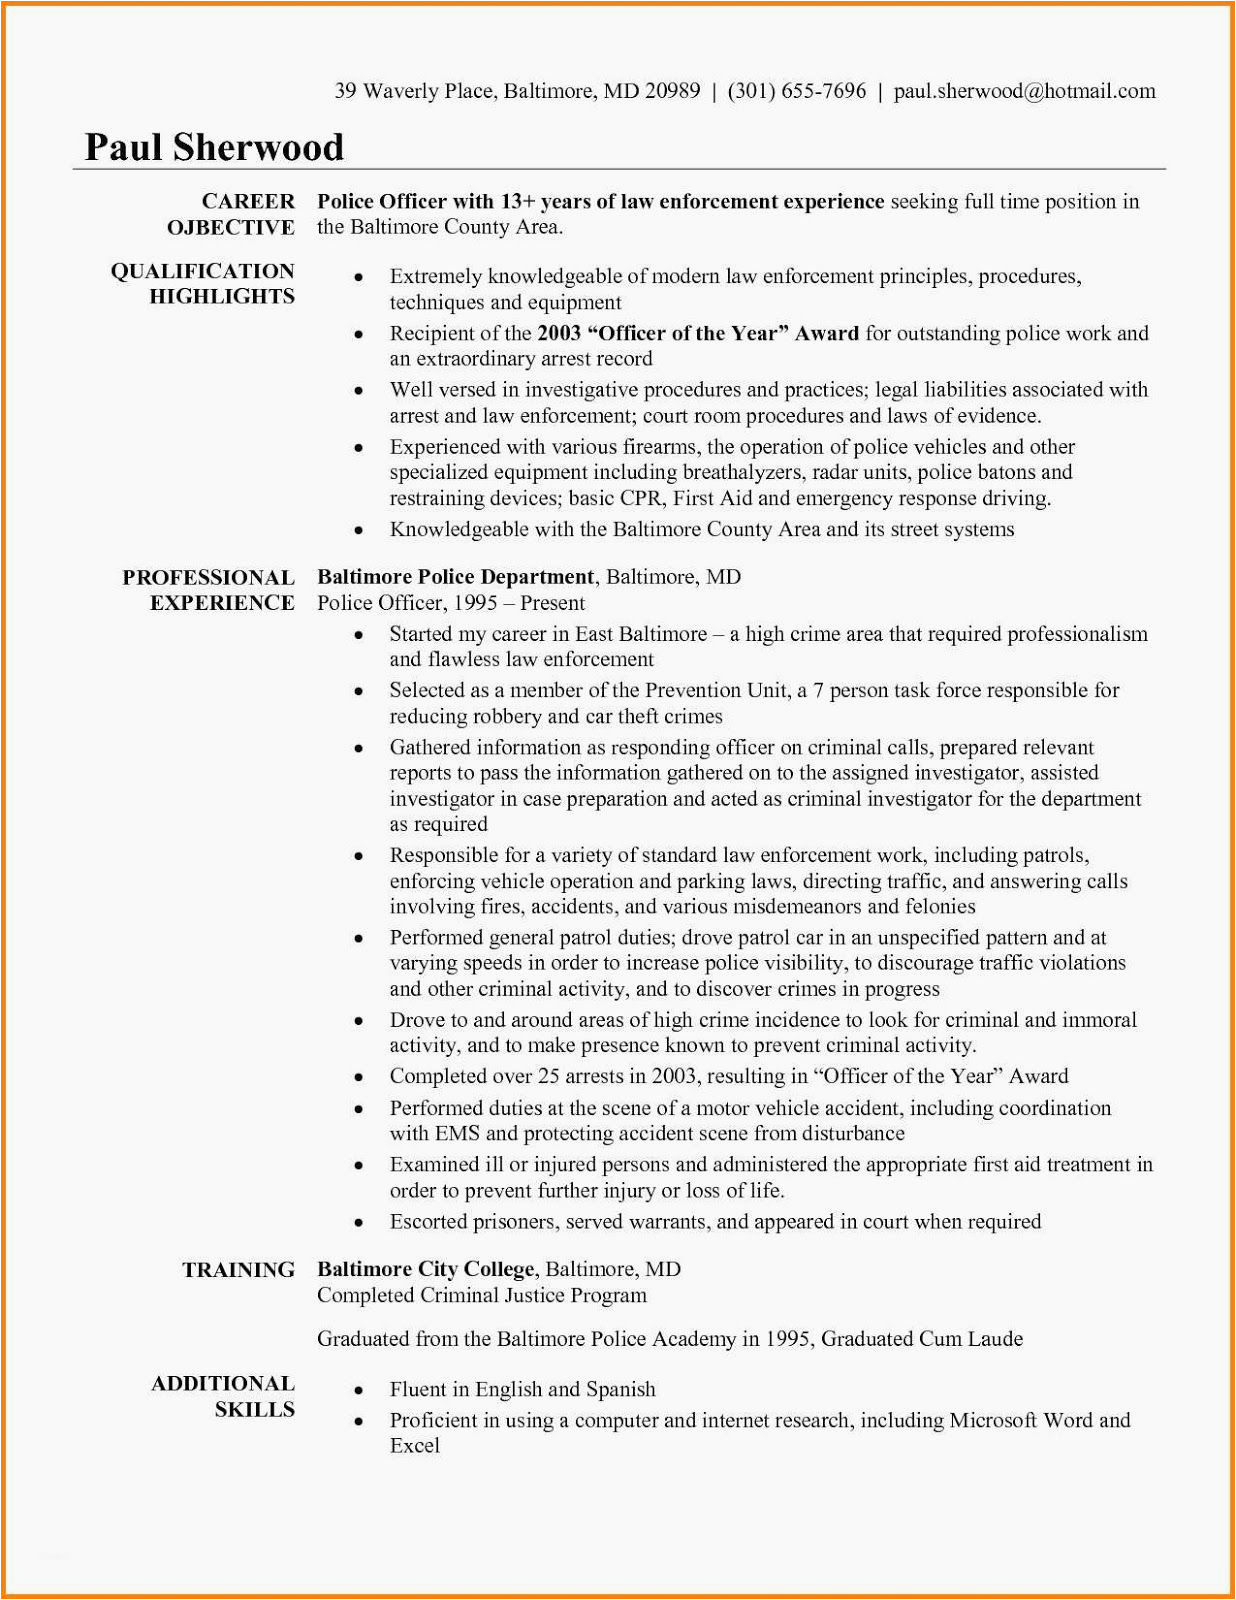 Sample Resume for Police Officer with No Experience Sample Resume for Police Ficer with No Experience – Simple Resume